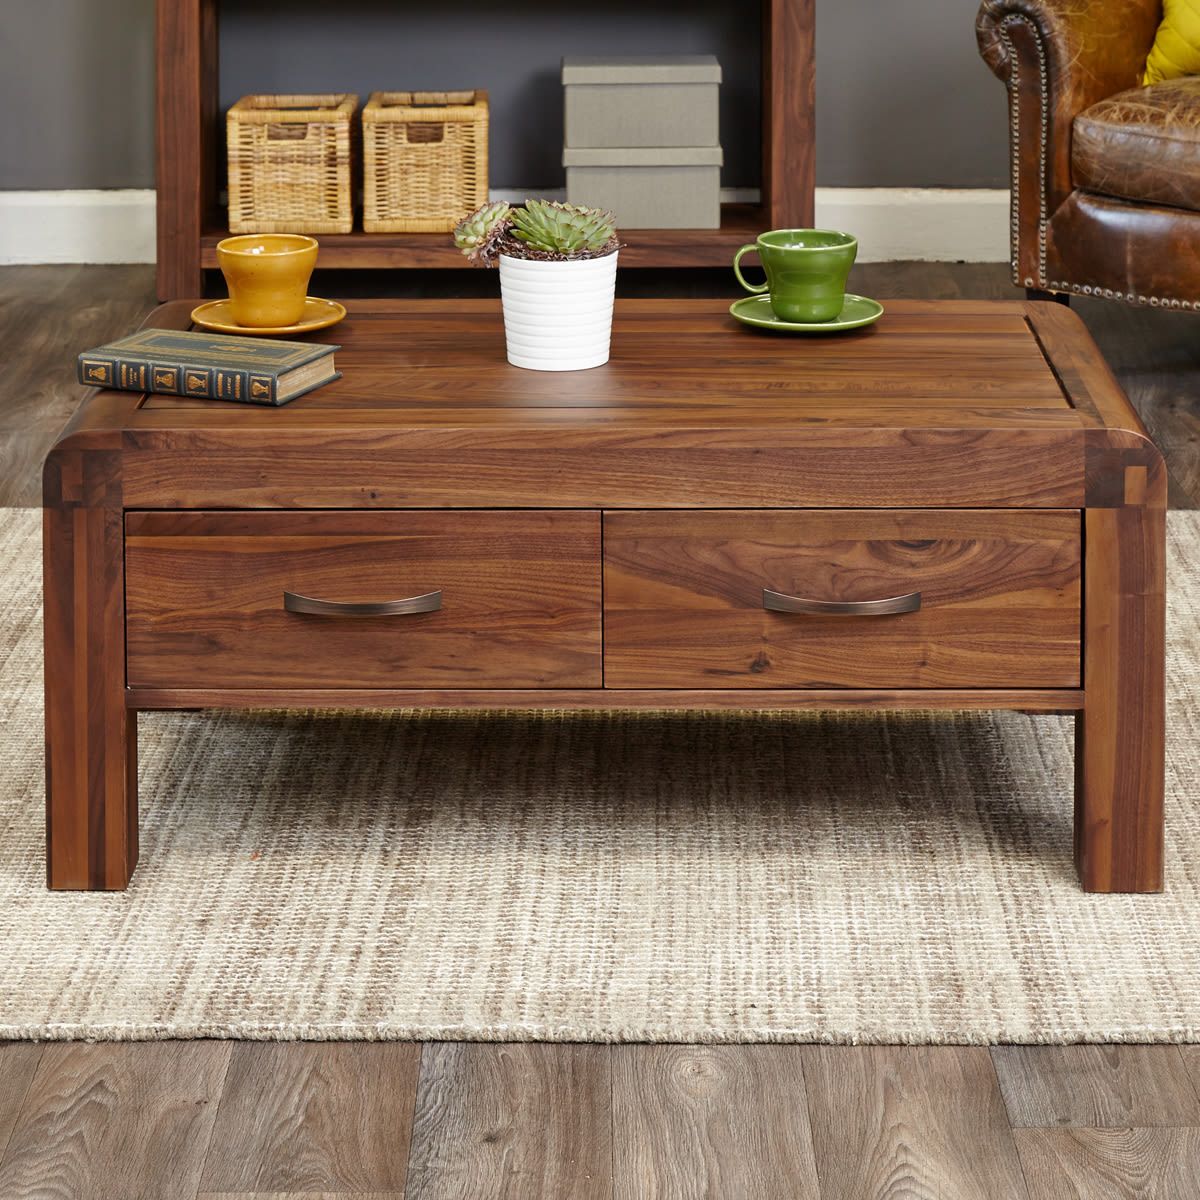 2020 Hand Finished Walnut Coffee Tables Inside Shiro Walnut Four Drawer Coffee Table Was £505.00 Now £395 (Gallery 1 of 20)